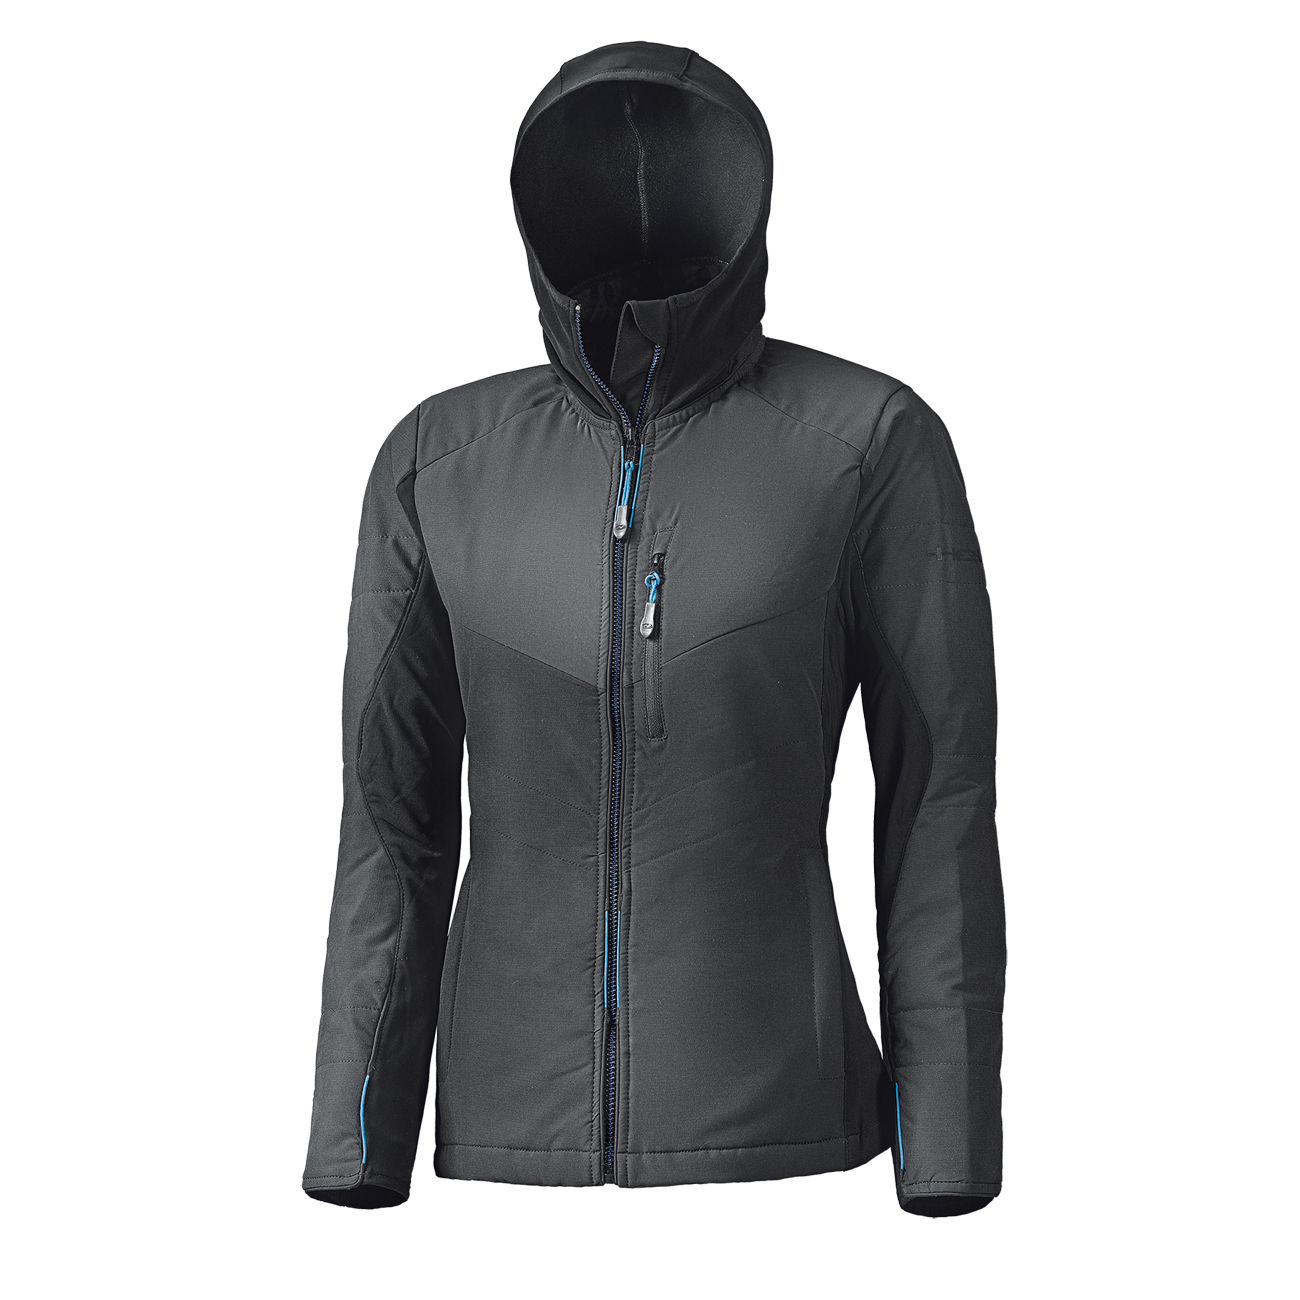 Clip-in Thermo Top Steppjacke